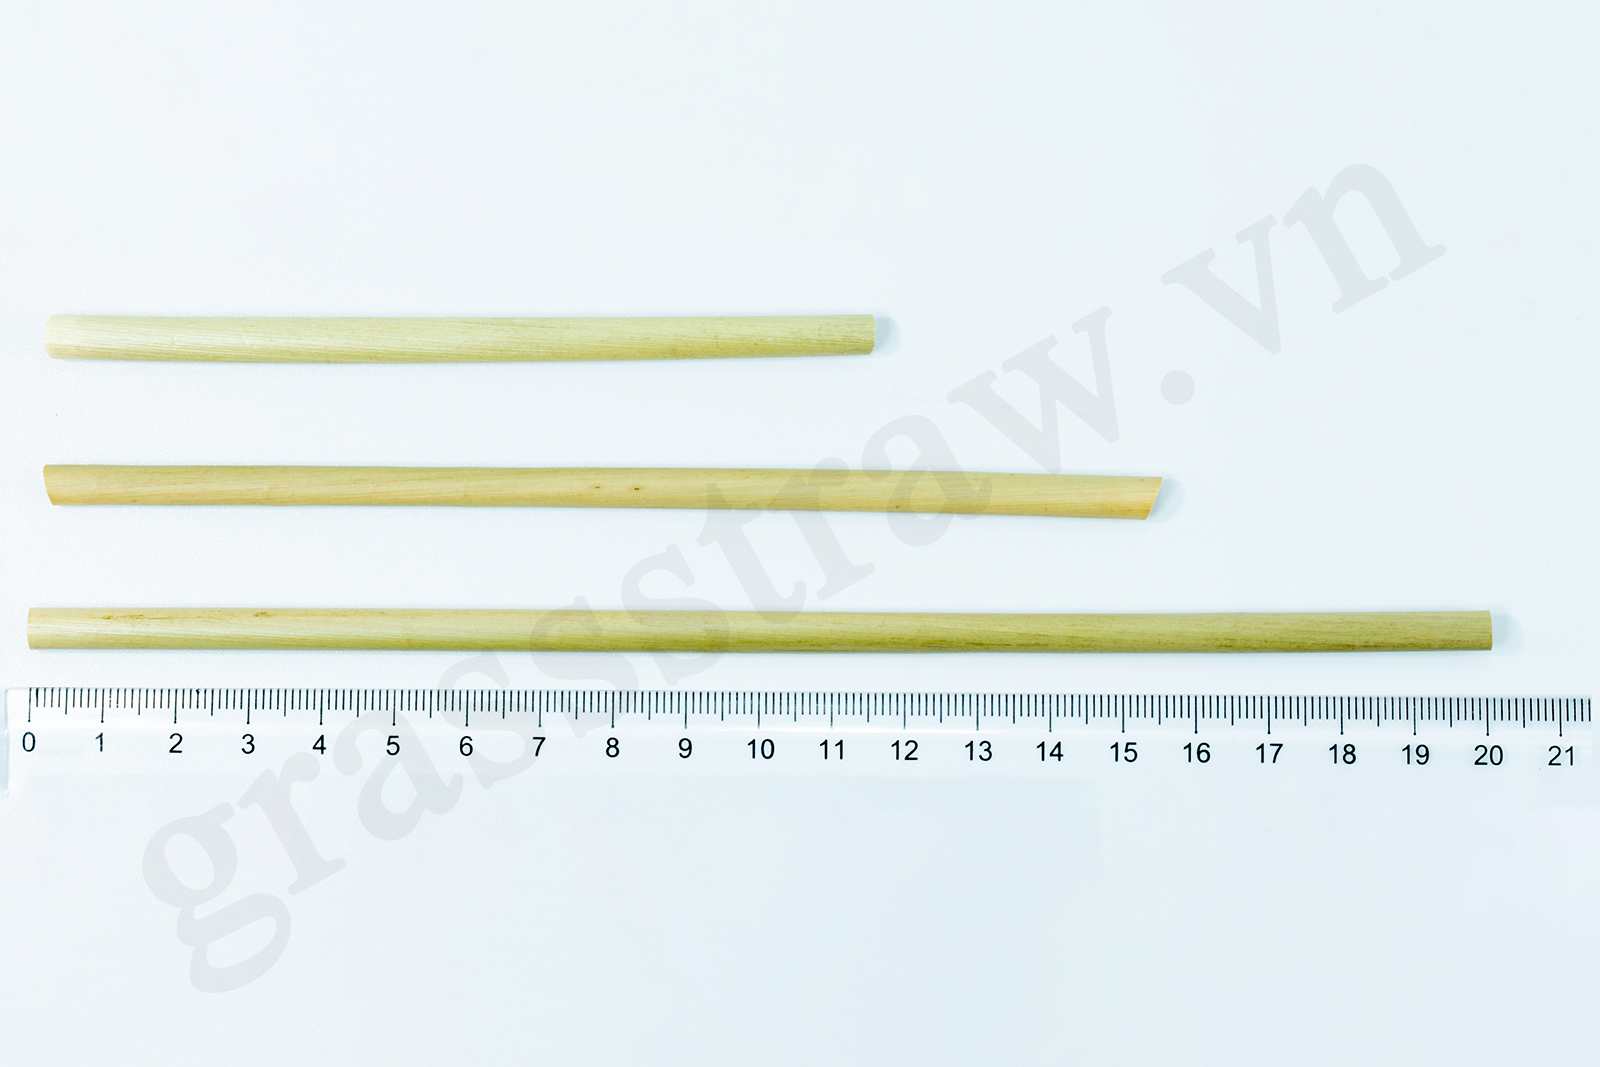 Grass Straws are 100% natural, durable, biodegradable, eco-friendly, affordable and good for your health.